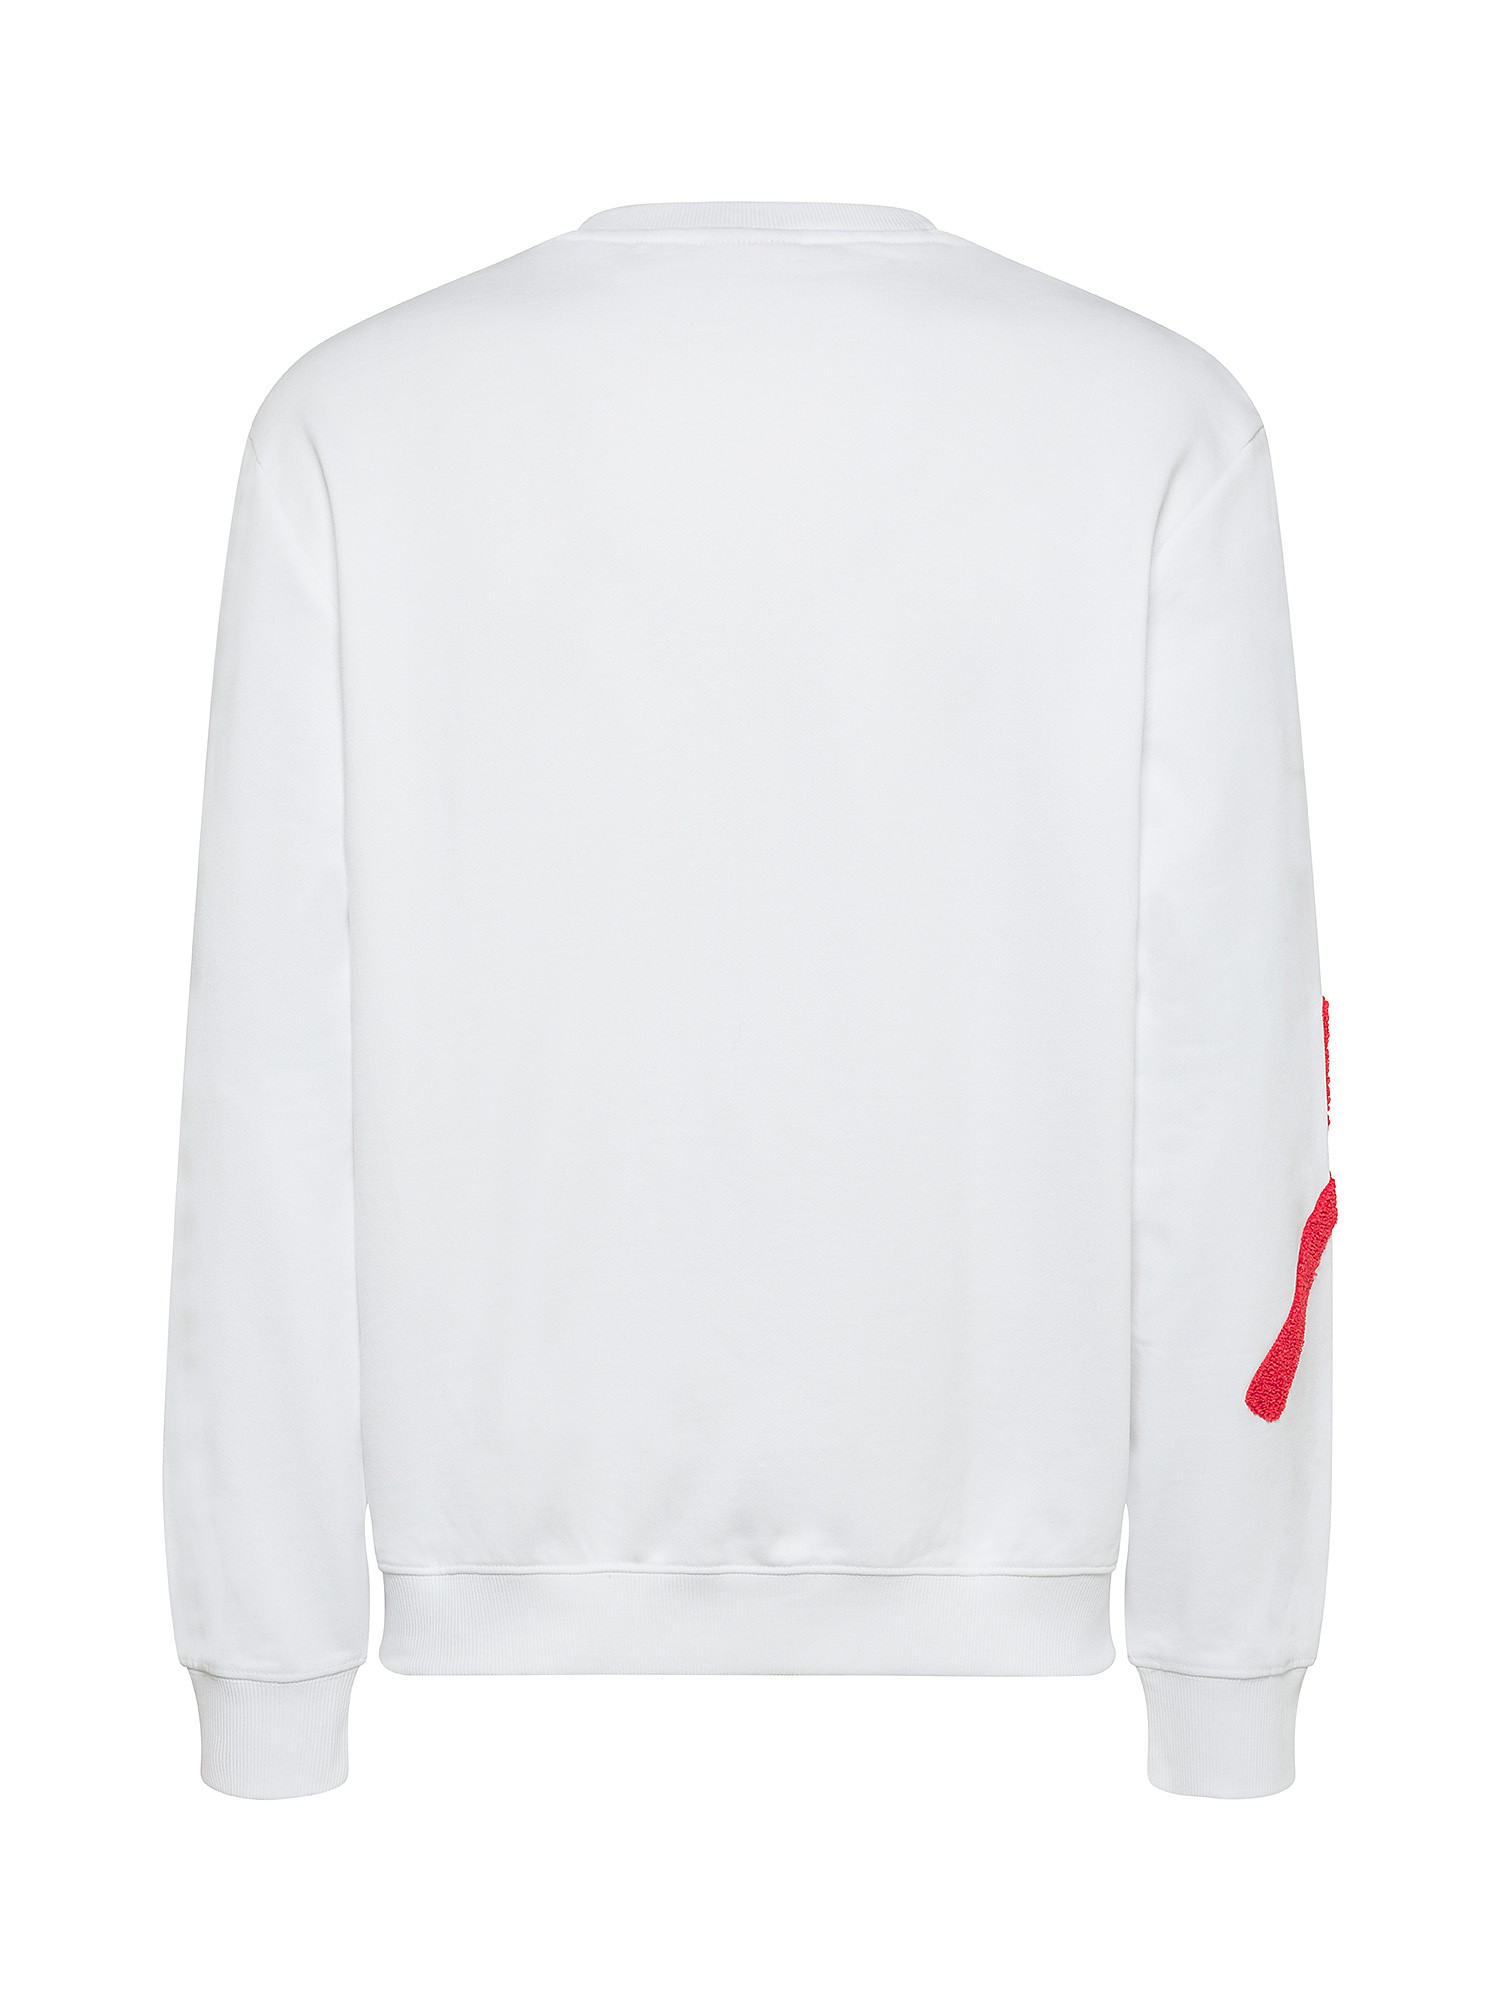 Hugo - Sweatshirt with embroidered logo in cotton, White, large image number 1